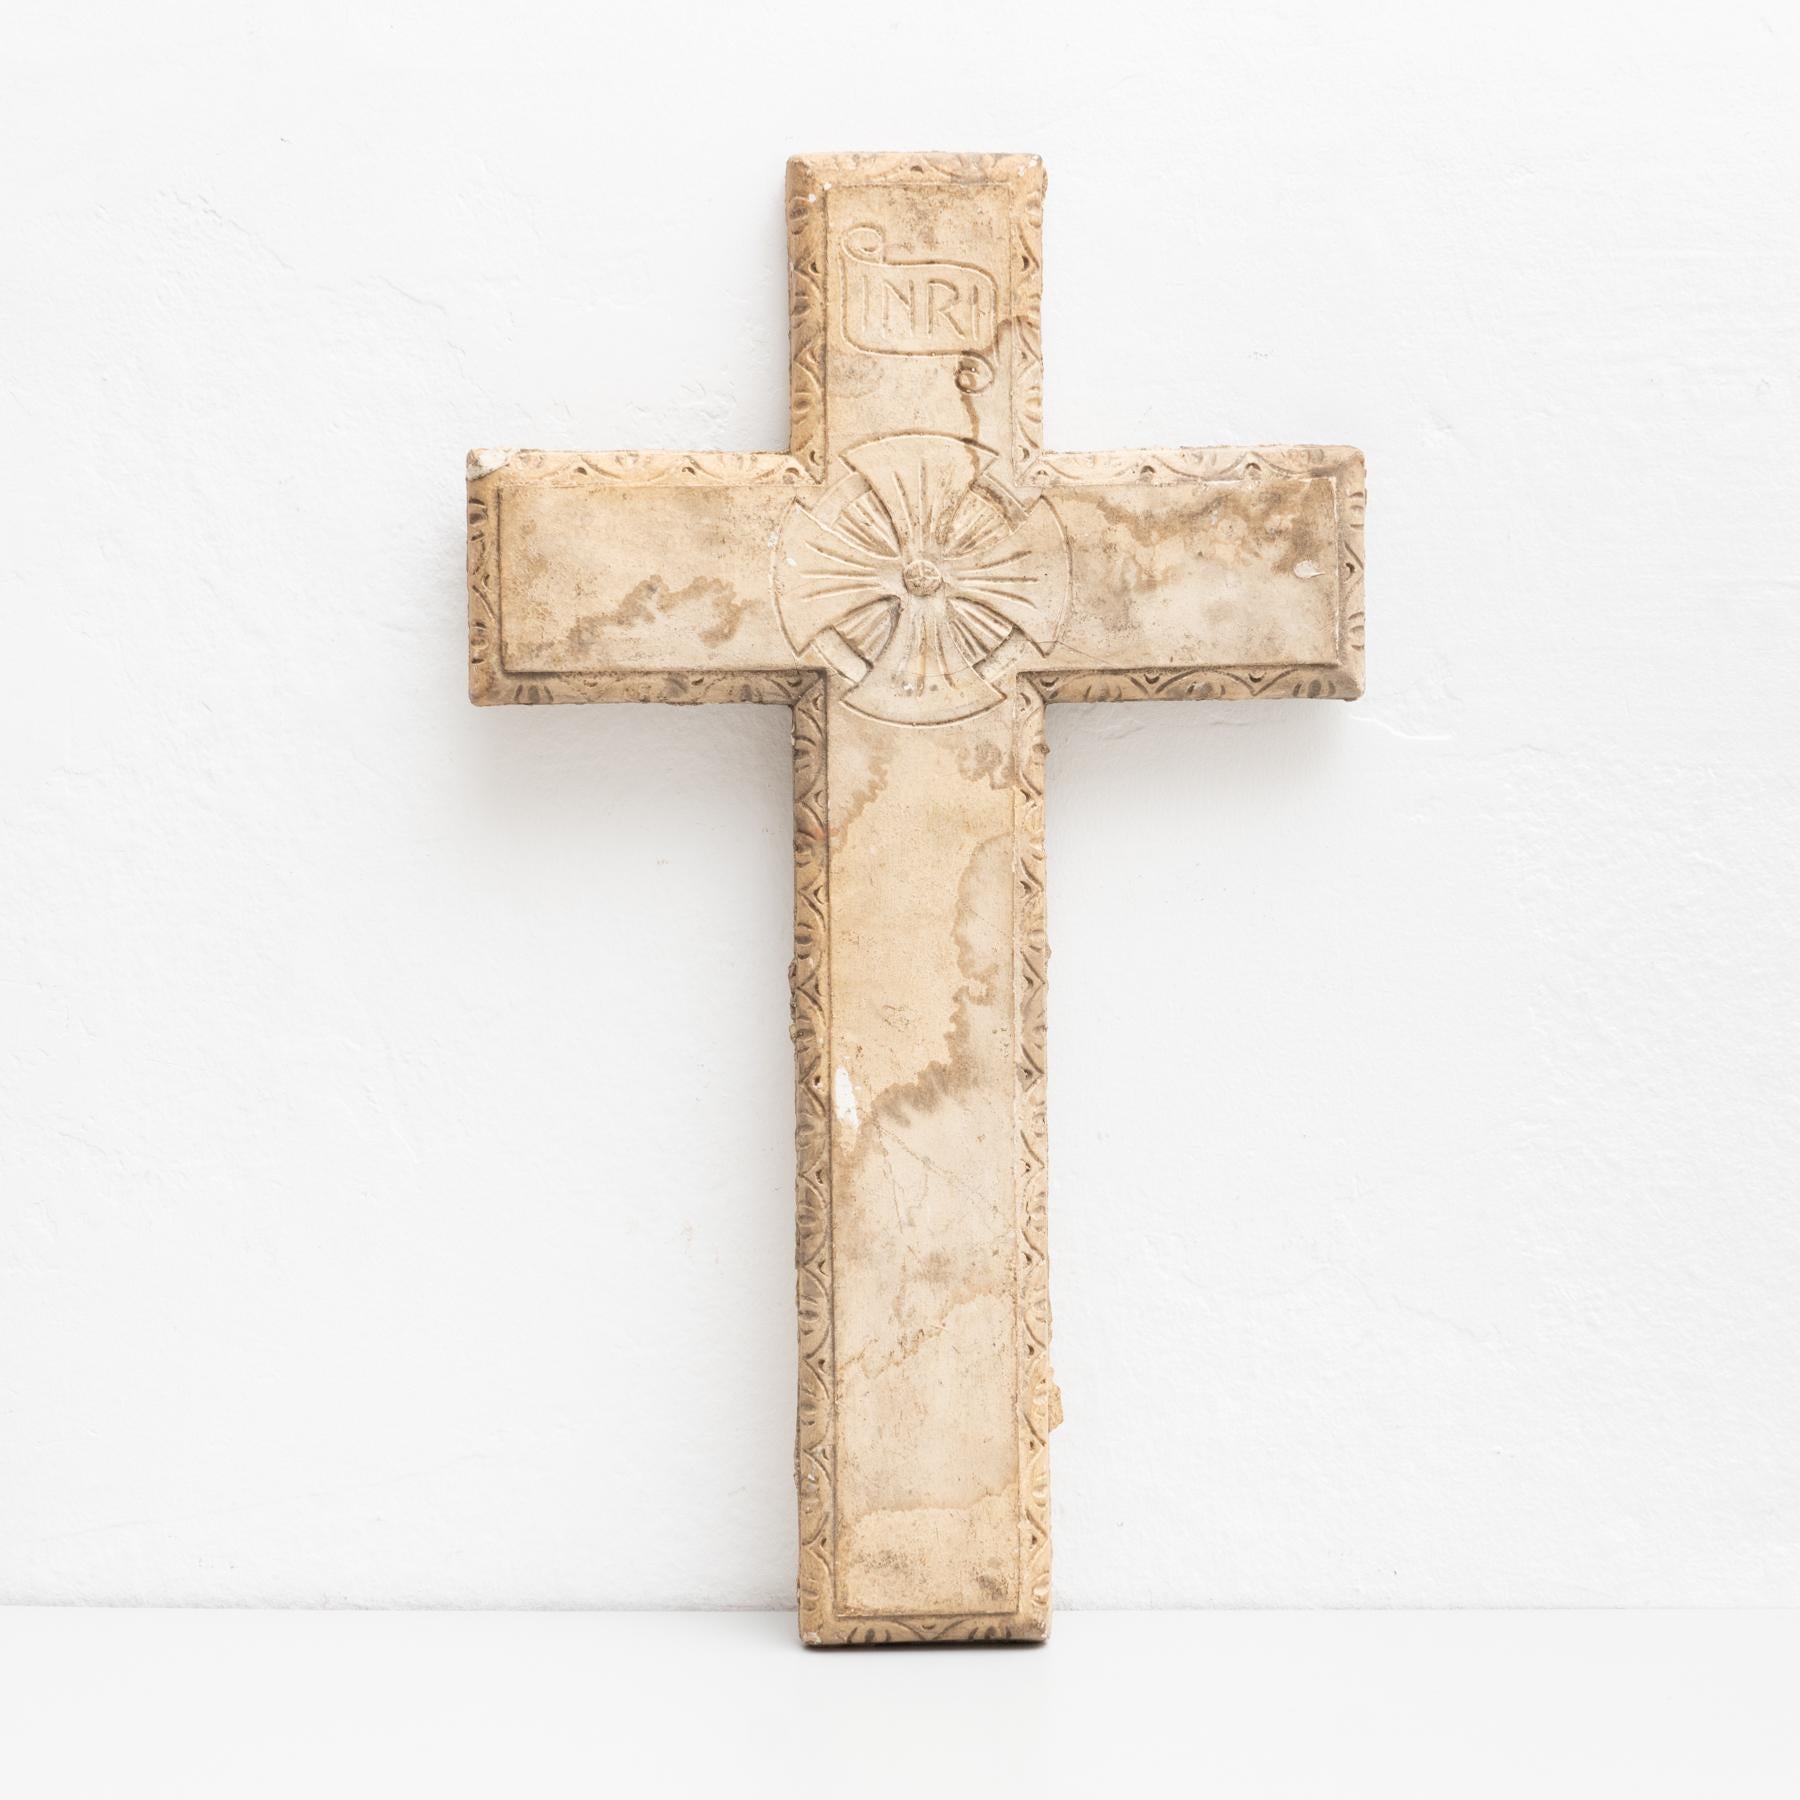 Traditional religious plaster wall artwork of a cross.

Made in traditional Catalan atelier in Olot, Spain, circa 1950.

Olot has a long tradition in the production of sculptures and religious imagery. The art and industry of religious statuary